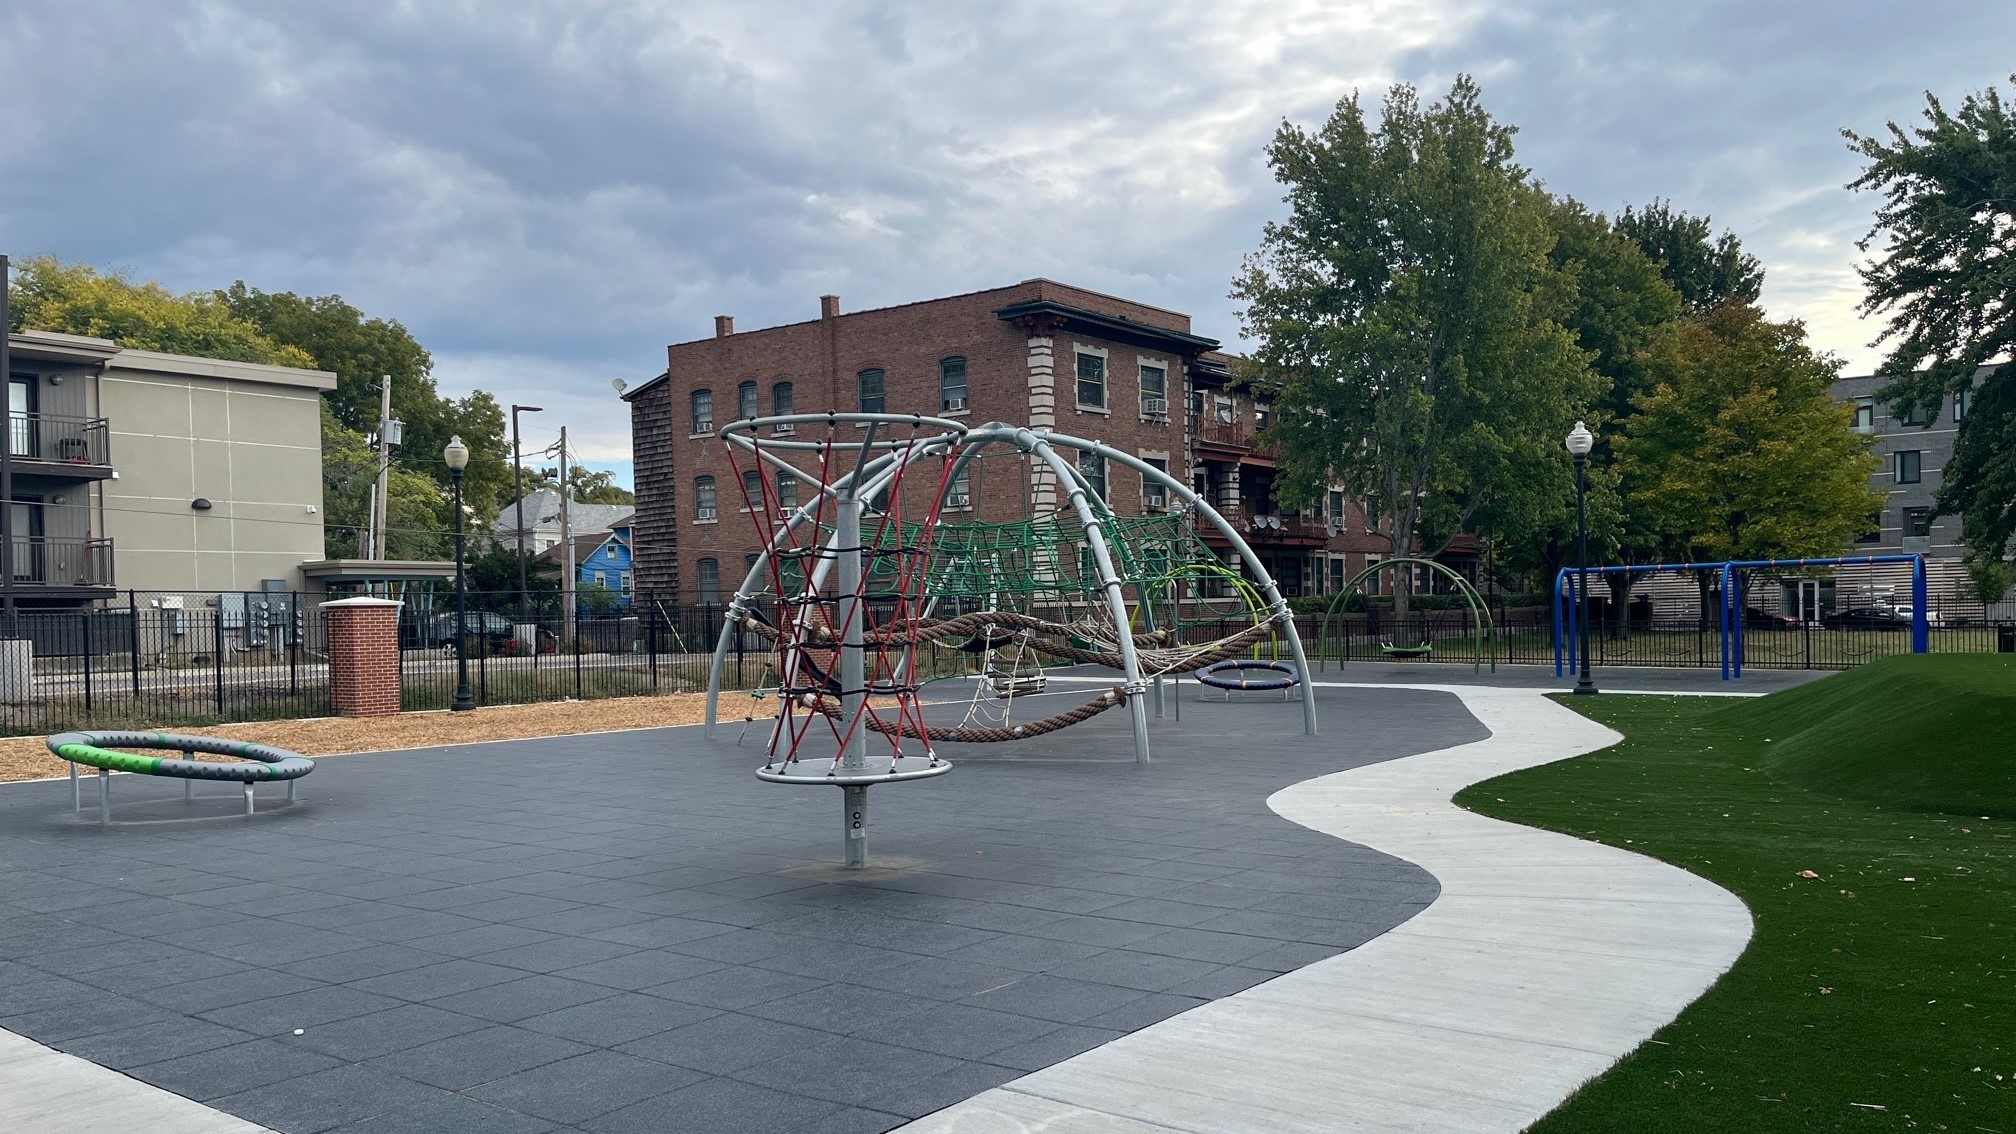 NEWS: Ribbon Cutting for Independence Plaza Park Improvements, October 18